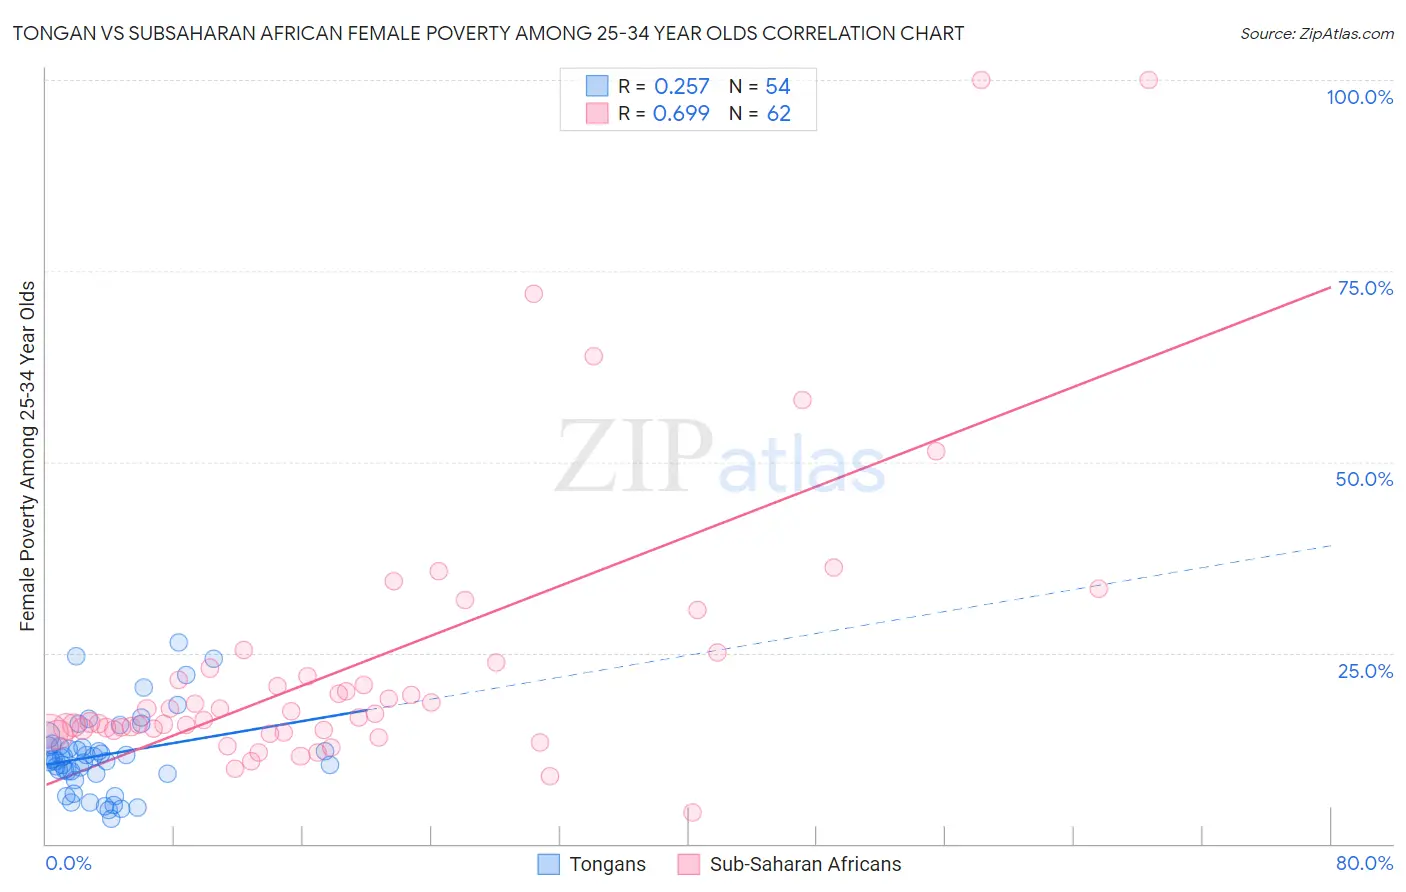 Tongan vs Subsaharan African Female Poverty Among 25-34 Year Olds